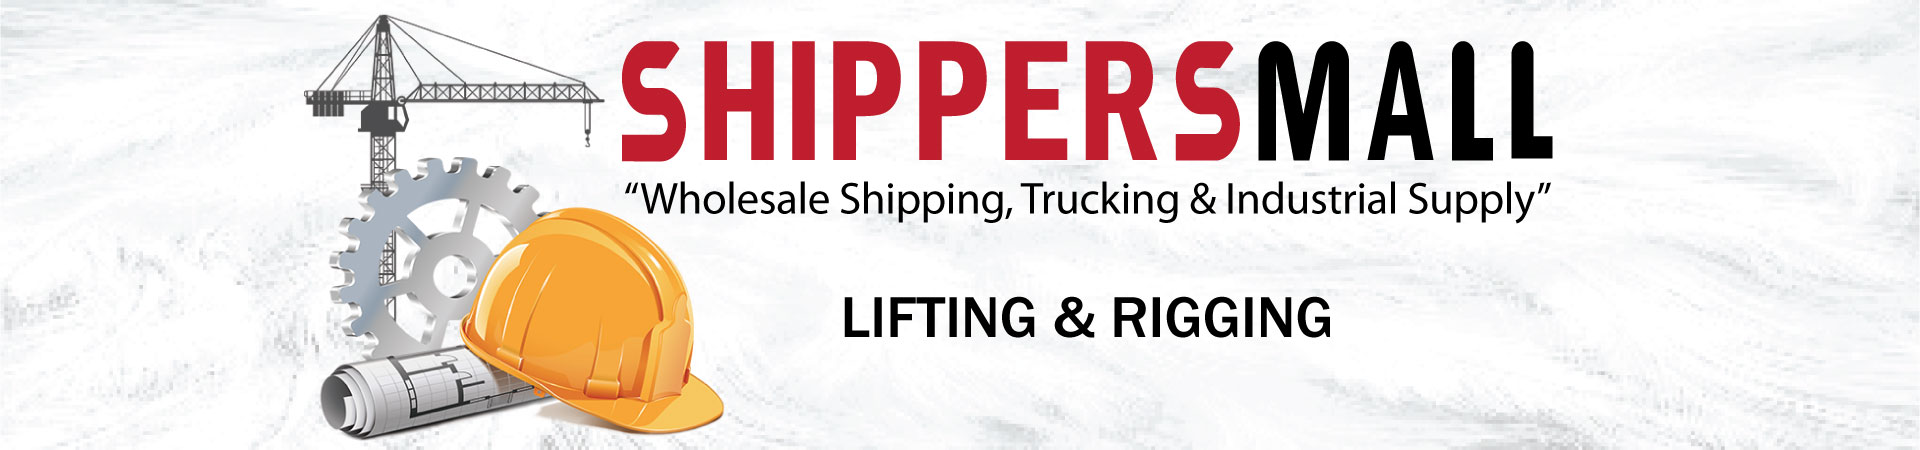 Shippers Mall - Lifting and Rigging Products